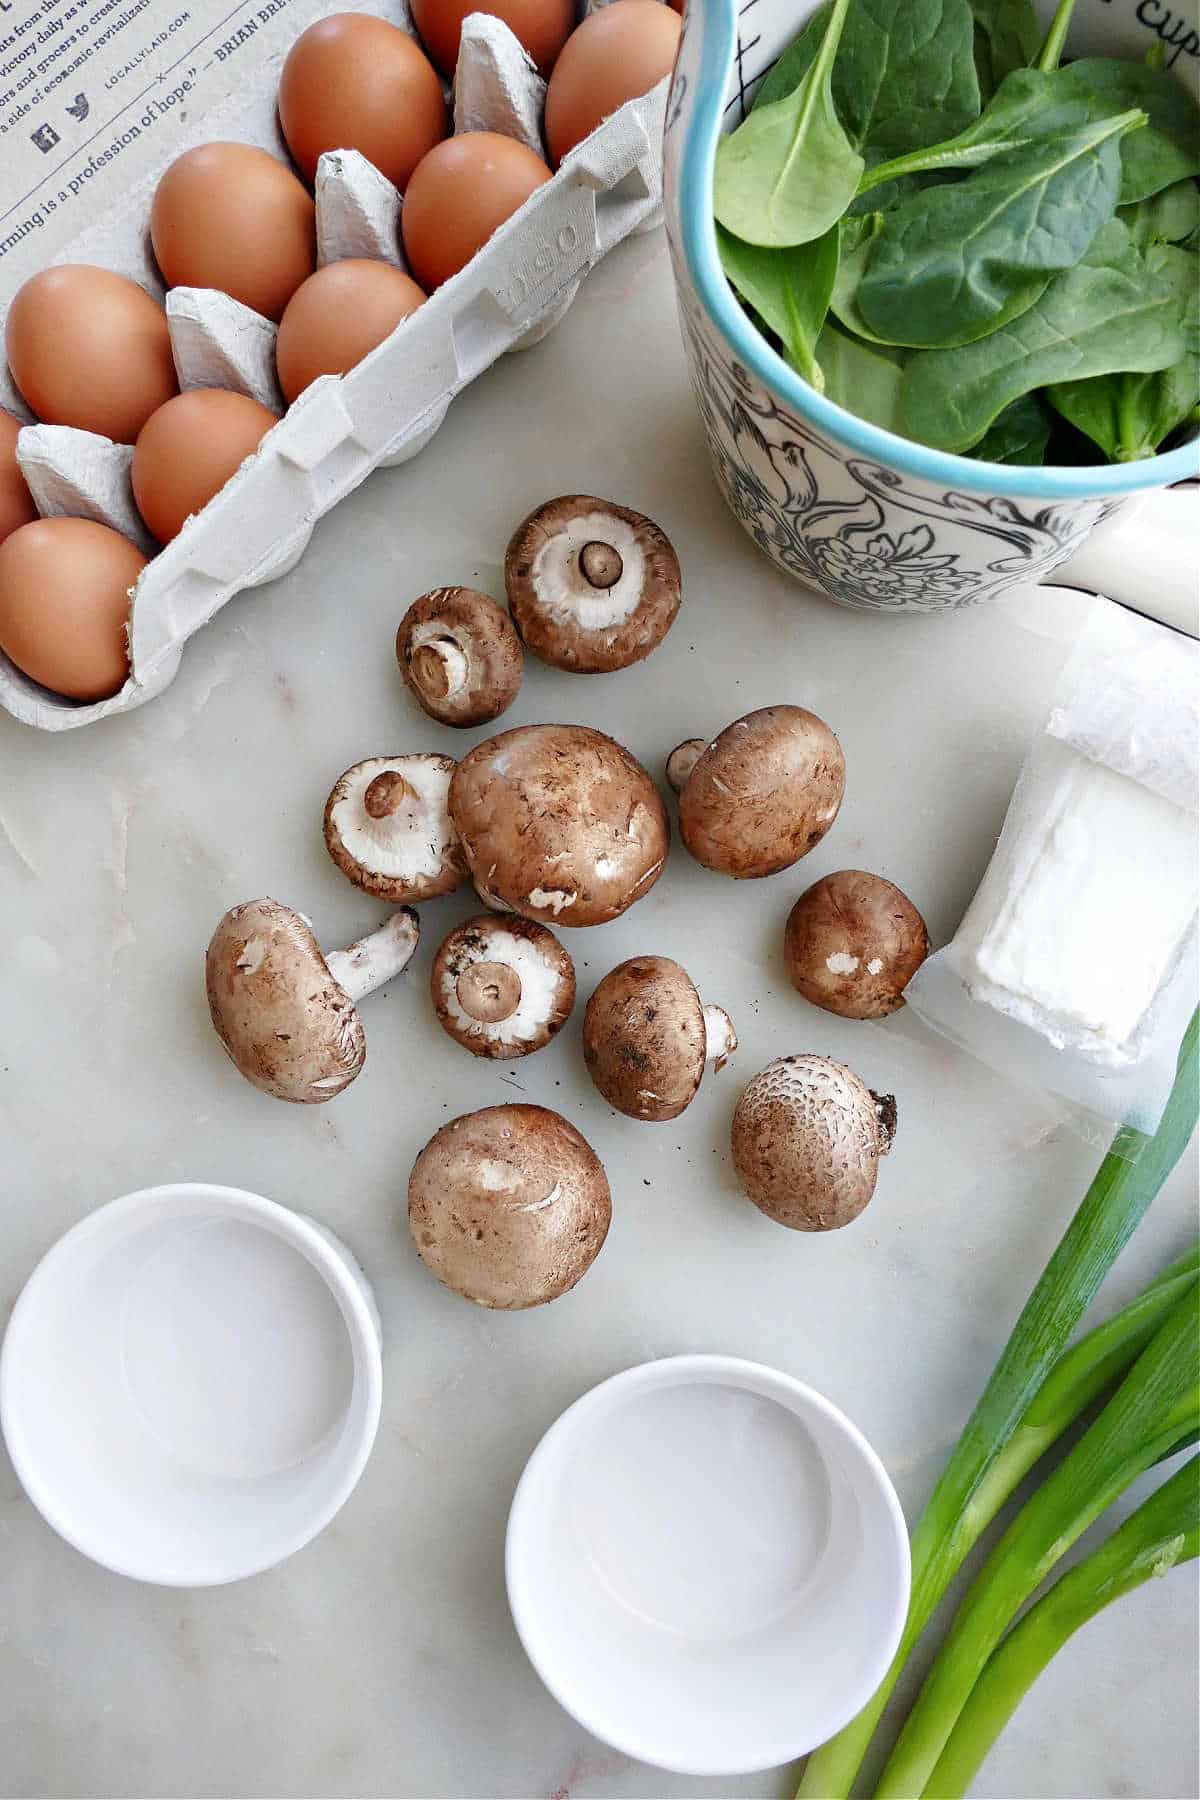 eggs, mushrooms, spinach, goat cheese, and scallions on a counter next to ramekins